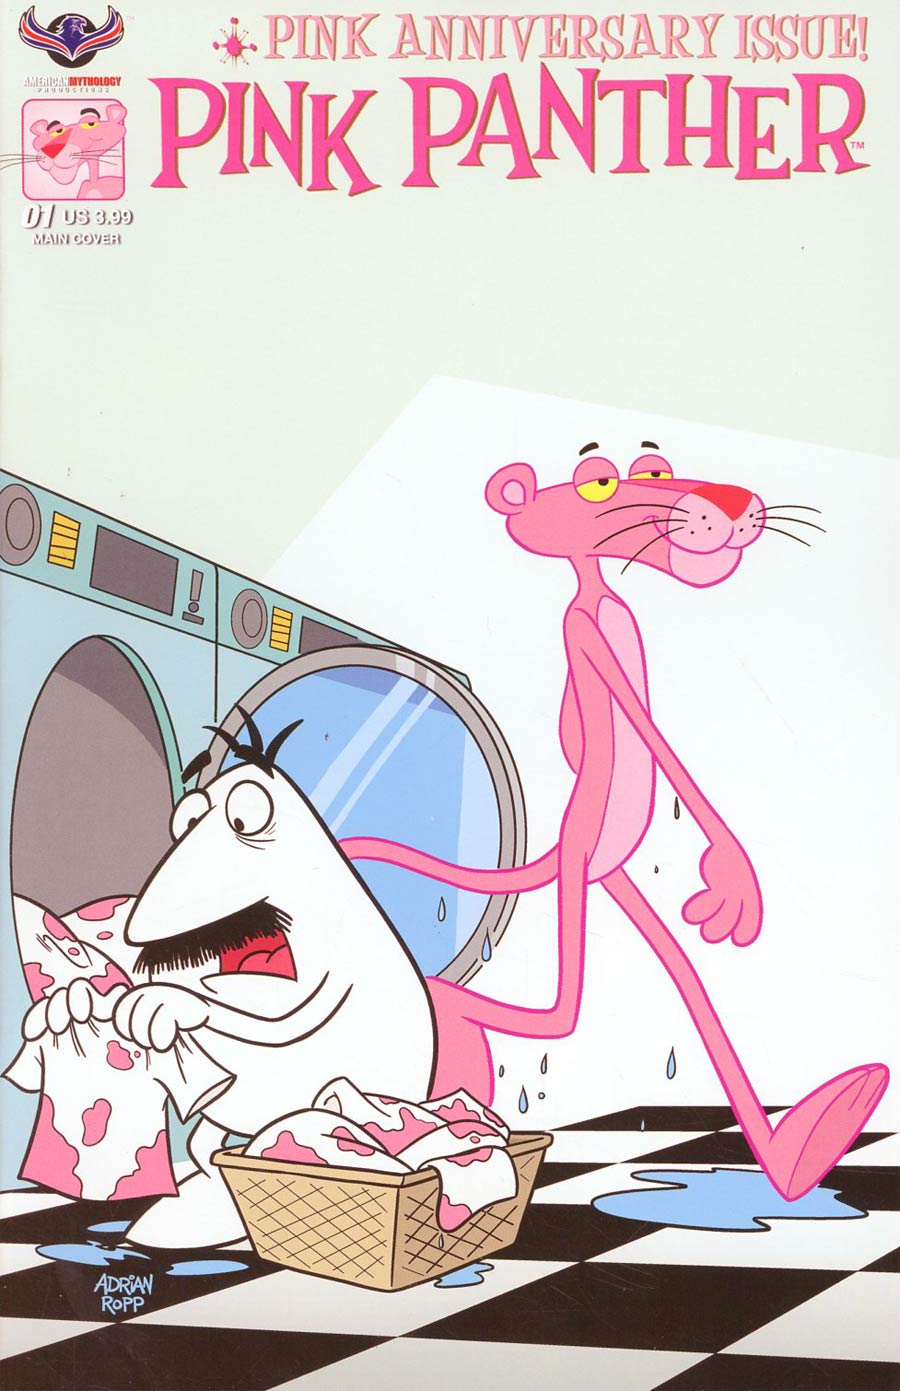 Pink Panther Pink Anniversary Cover A Regular Adrian Ropp Cover